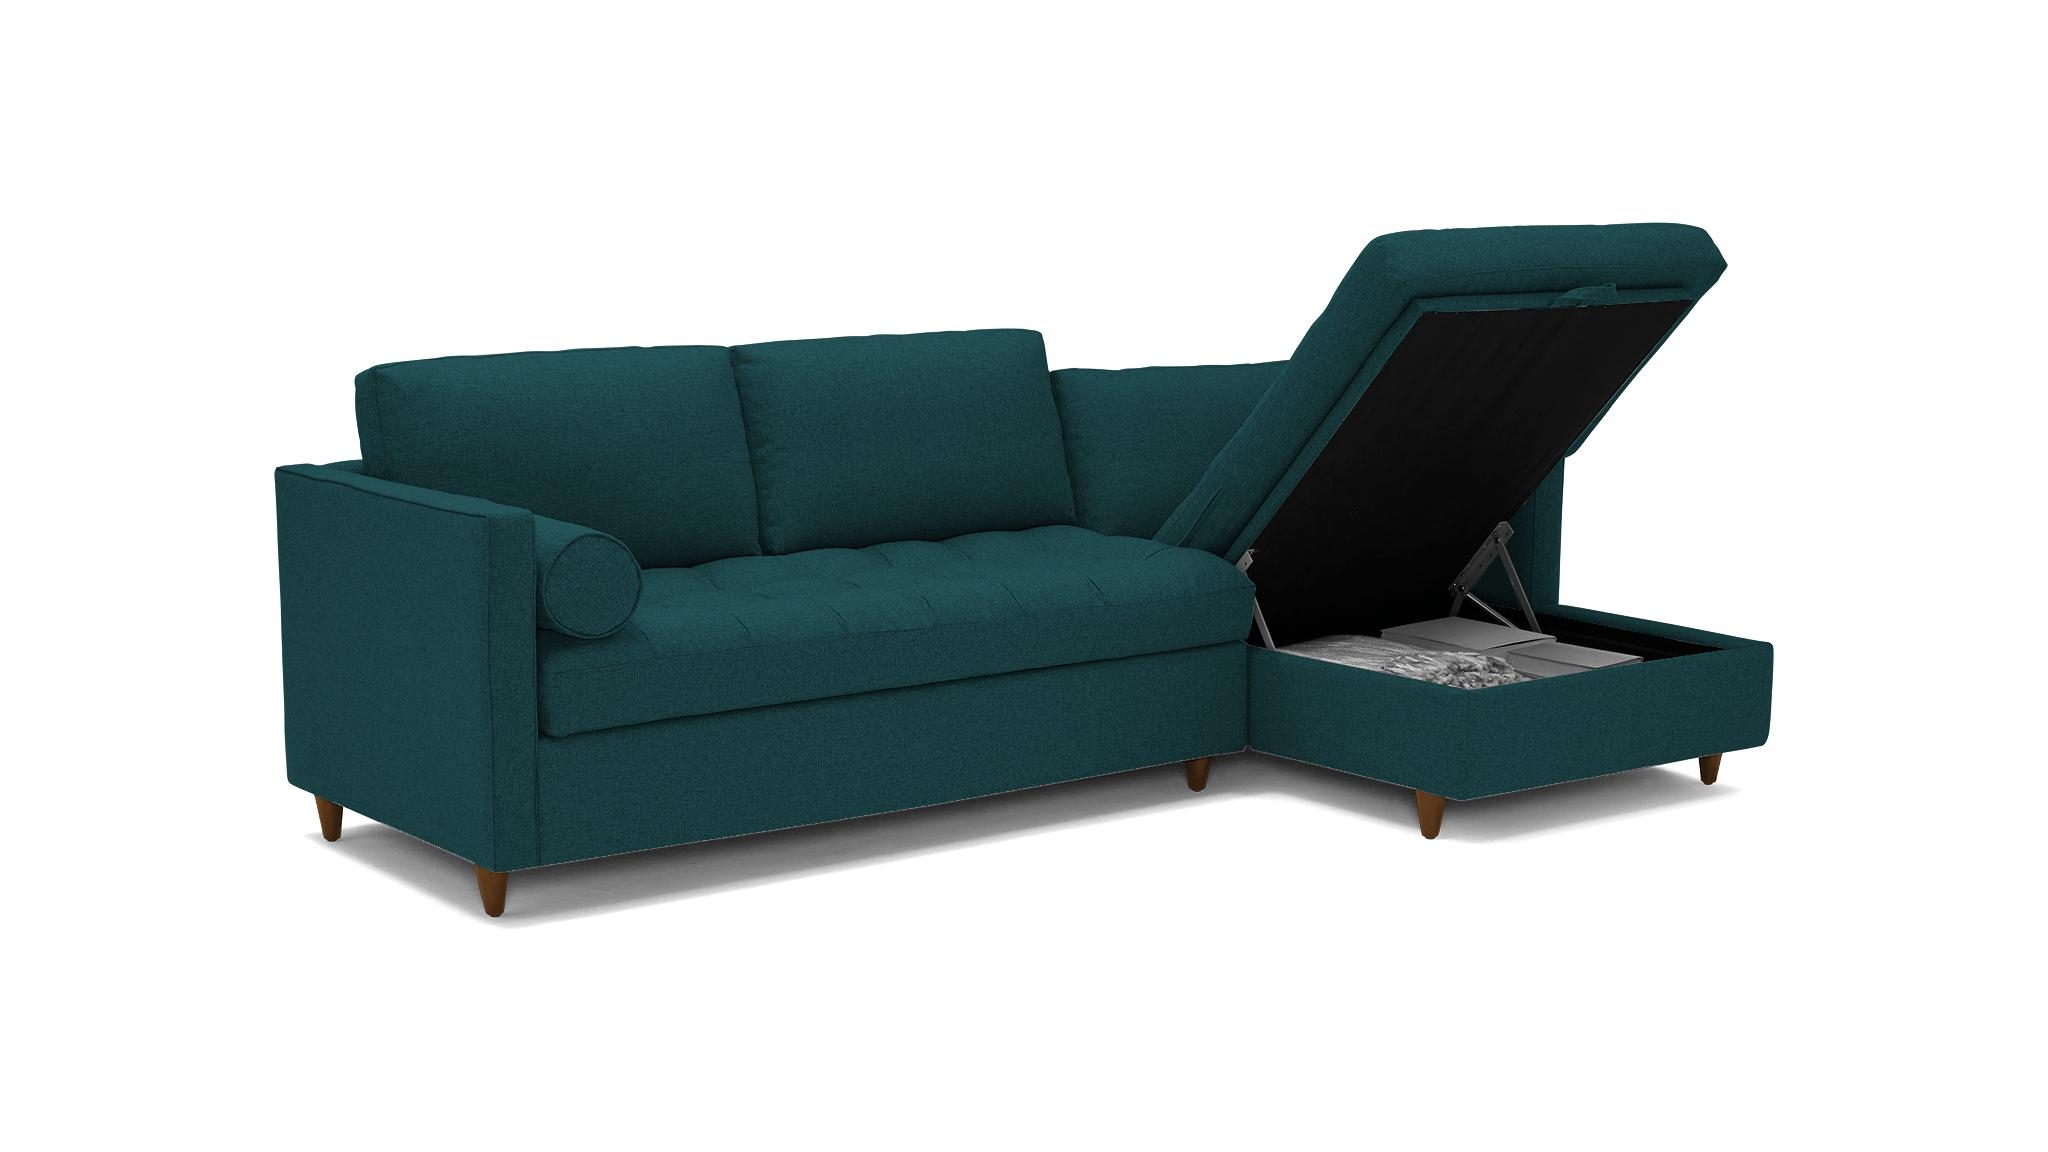 Blue Briar Mid Century Modern Sectional with Storage - Royale Peacock - Mocha - Left - Image 2